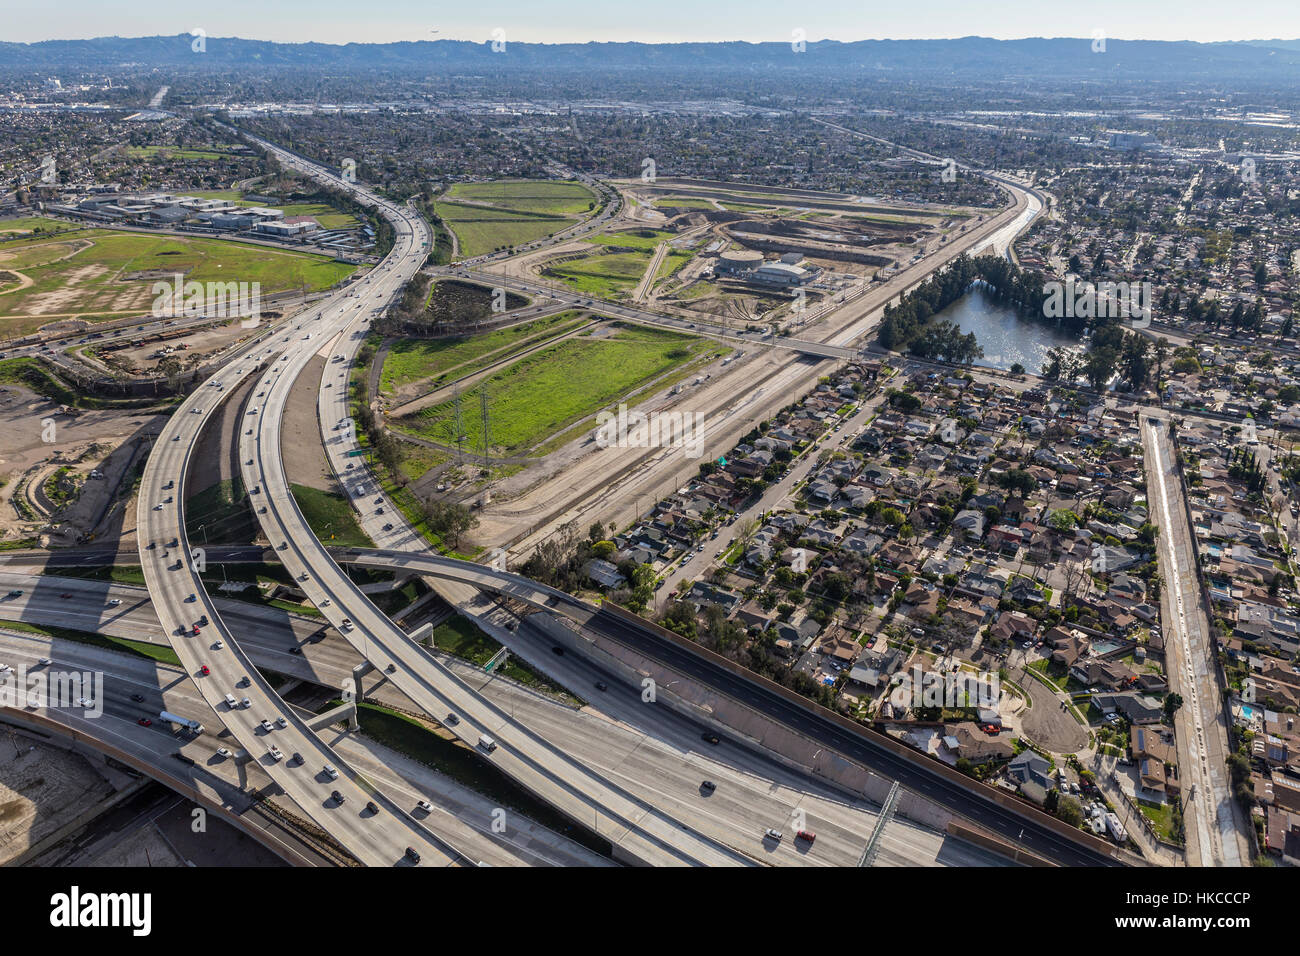 Los Angeles Hollywood 170 and Golden State 5 freeway interchange in the San Fernando Valley. Stock Photo